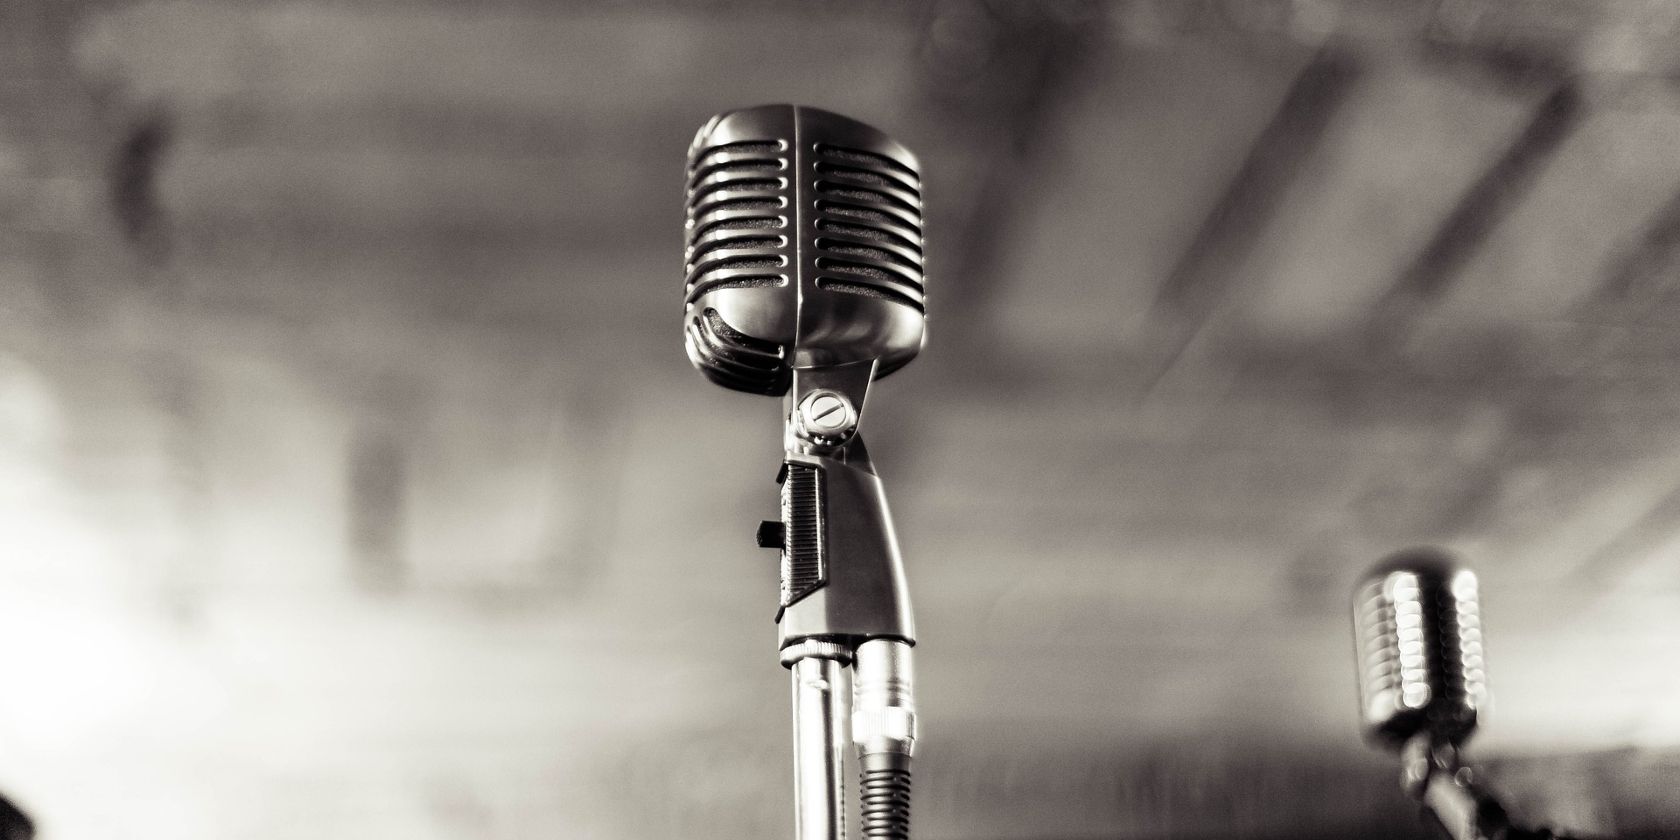 silver microphones with gray background